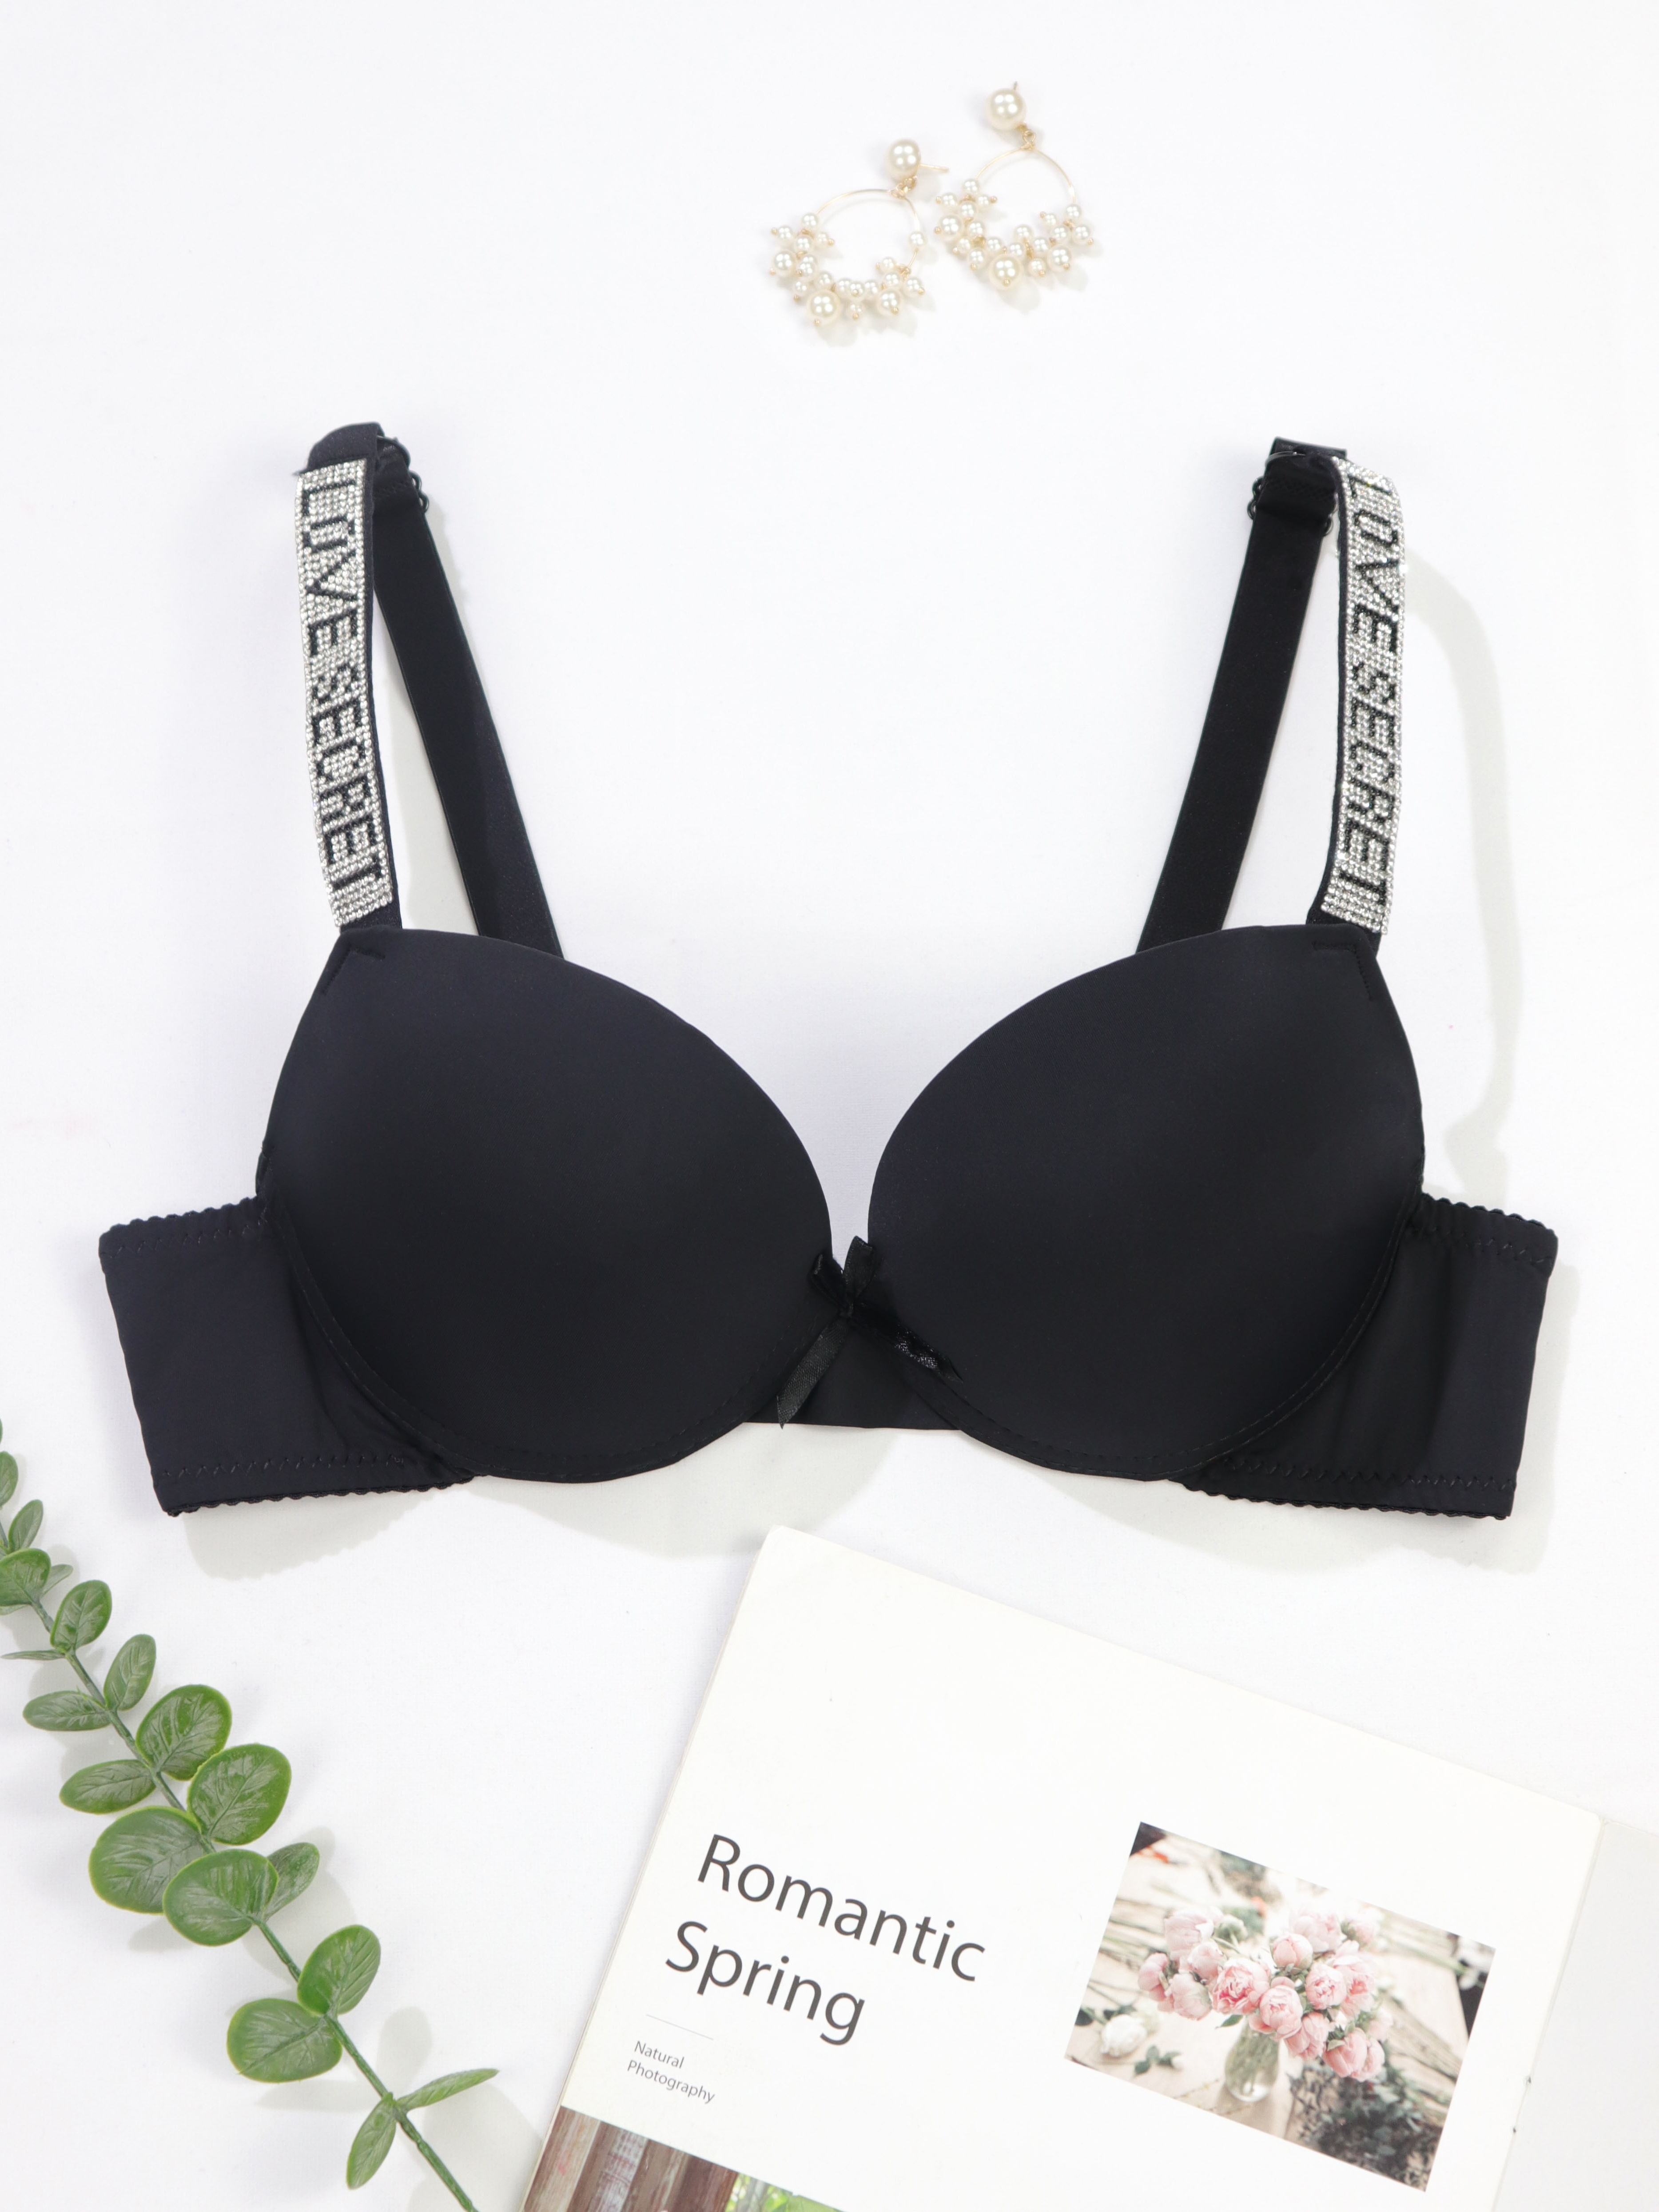 Womens Rhinestone Brief Push Up Bra And Panty Set Back Sexy Letter Design,  Comfortable Lingerie Bikini From Ggblue, $24.49